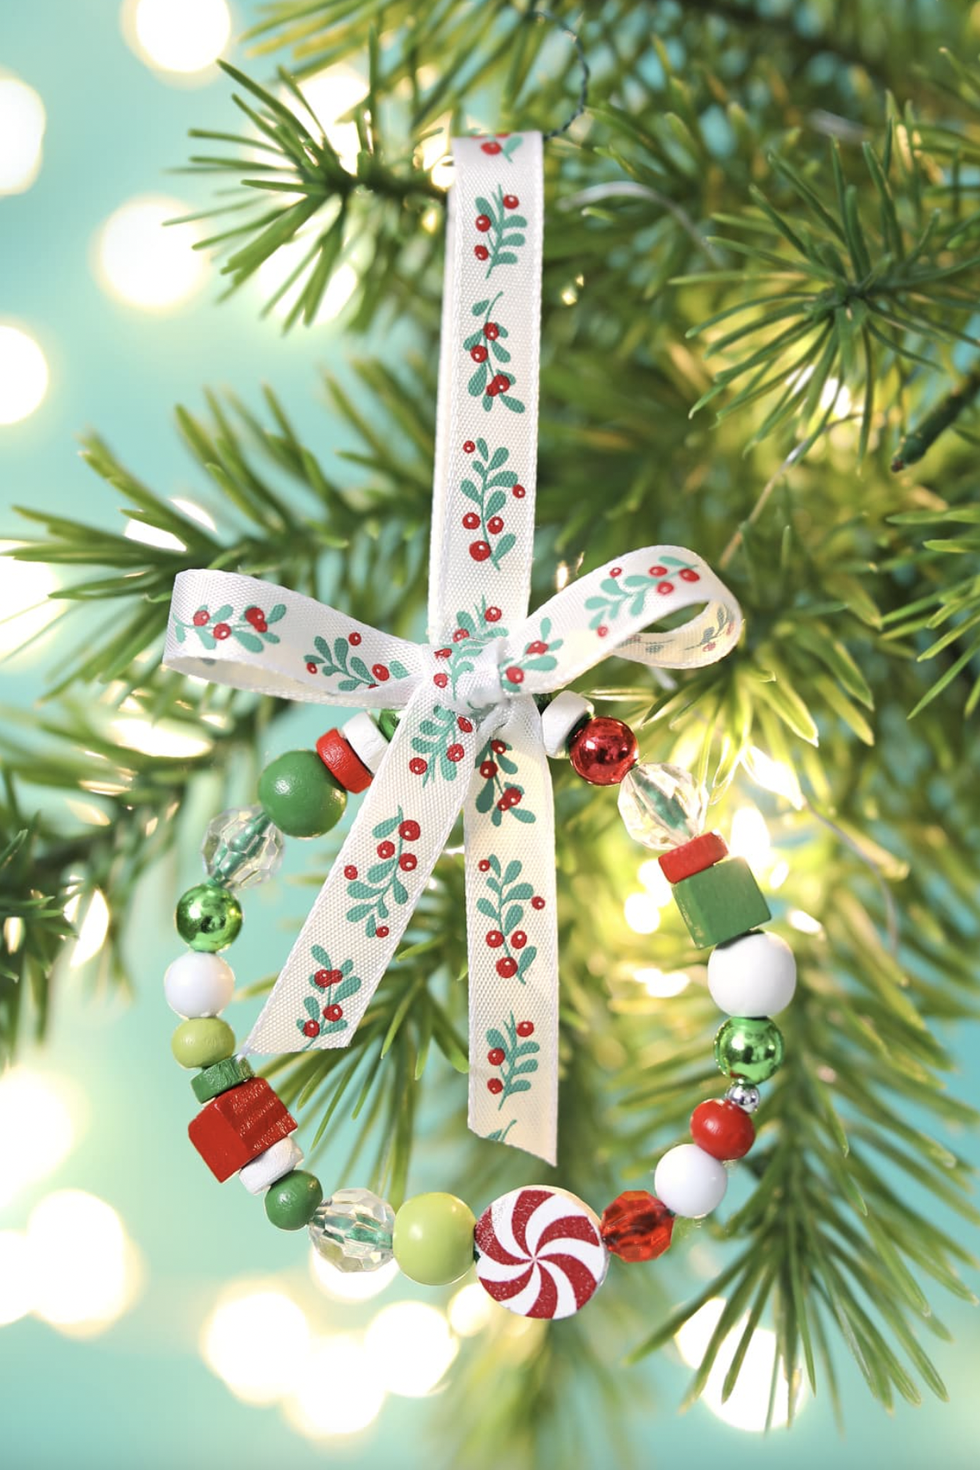 A Few Supplies Is All It Takes to Make This Classic Xmas Ornament